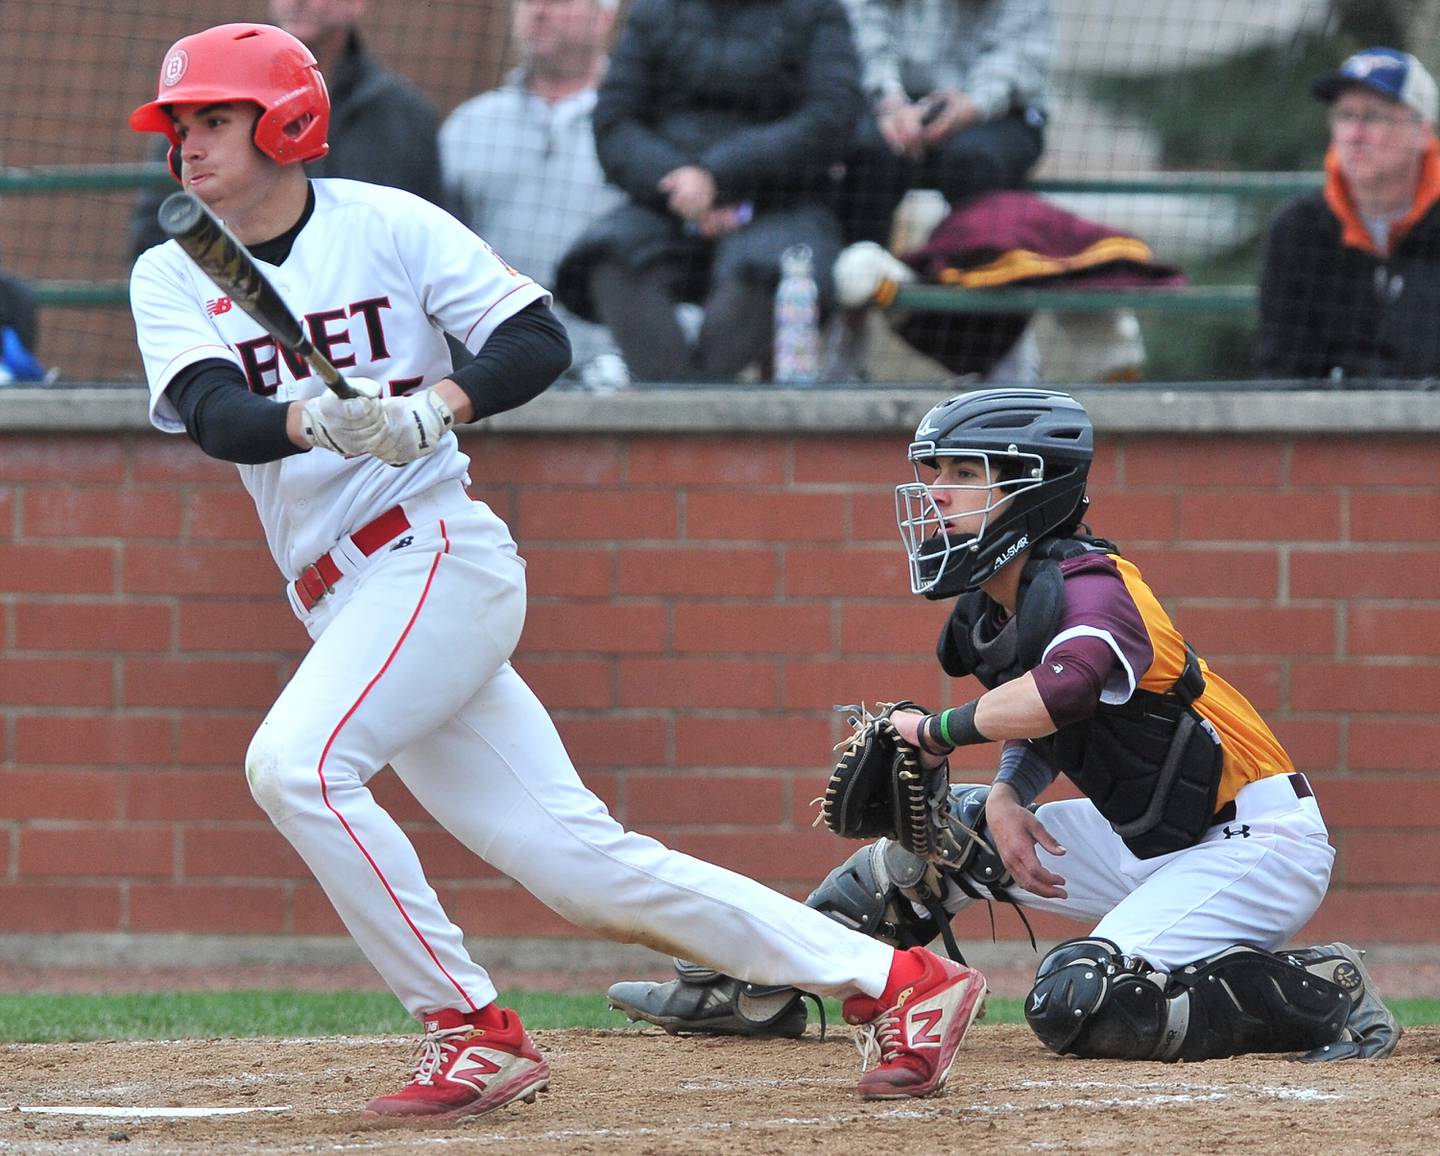 Benet's Peter Messina smashes a base hit during a game  against Montini on Apr. 28, 2022 at Benet Academy in Lisle.